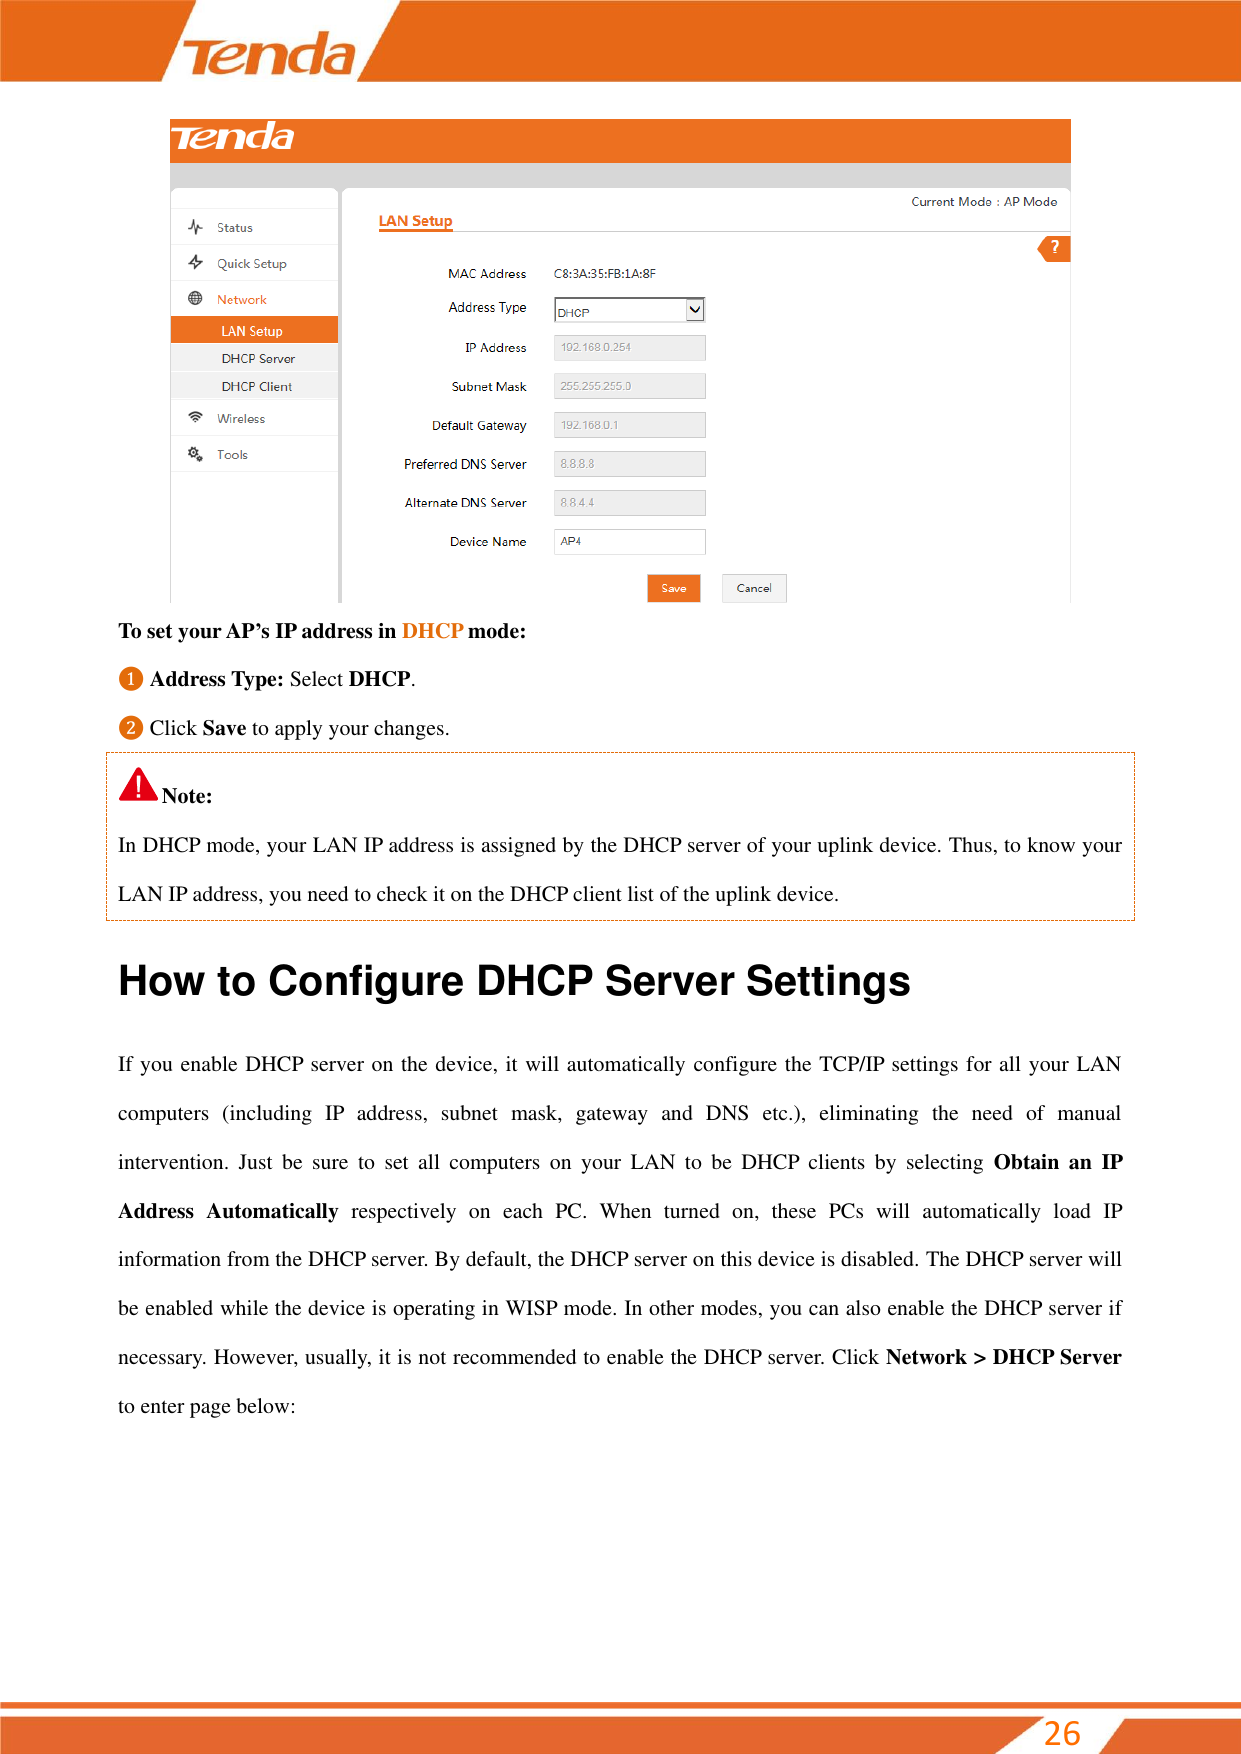         26  To set your AP’s IP address in DHCP mode: ❶ Address Type: Select DHCP. ❷ Click Save to apply your changes. Note: In DHCP mode, your LAN IP address is assigned by the DHCP server of your uplink device. Thus, to know your LAN IP address, you need to check it on the DHCP client list of the uplink device. How to Configure DHCP Server Settings If you enable DHCP server on the device, it will automatically configure the TCP/IP settings for all your LAN computers  (including  IP  address,  subnet  mask,  gateway  and  DNS  etc.),  eliminating  the  need  of  manual intervention.  Just  be  sure  to  set  all  computers  on  your  LAN  to  be  DHCP  clients  by  selecting  Obtain  an  IP Address  Automatically  respectively  on  each  PC.  When  turned  on,  these  PCs  will  automatically  load  IP information from the DHCP server. By default, the DHCP server on this device is disabled. The DHCP server will be enabled while the device is operating in WISP mode. In other modes, you can also enable the DHCP server if necessary. However, usually, it is not recommended to enable the DHCP server. Click Network &gt; DHCP Server to enter page below: 